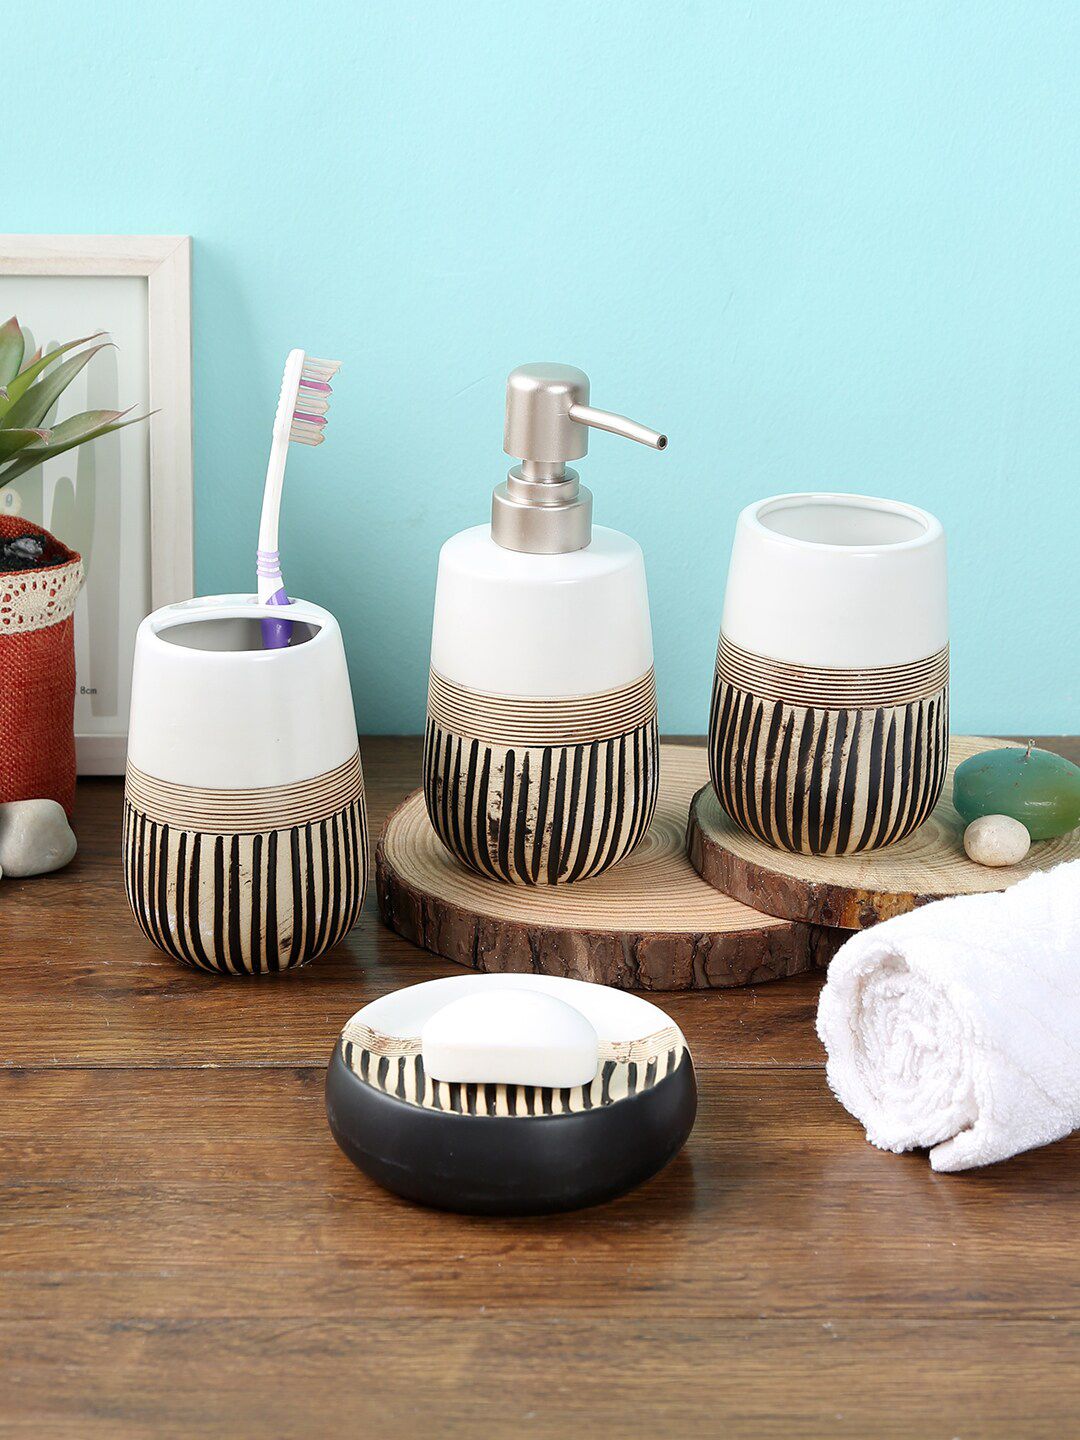 House Of Accessories Set Of 4 White & Brown Striped Ceramic Bathroom Accessories Price in India